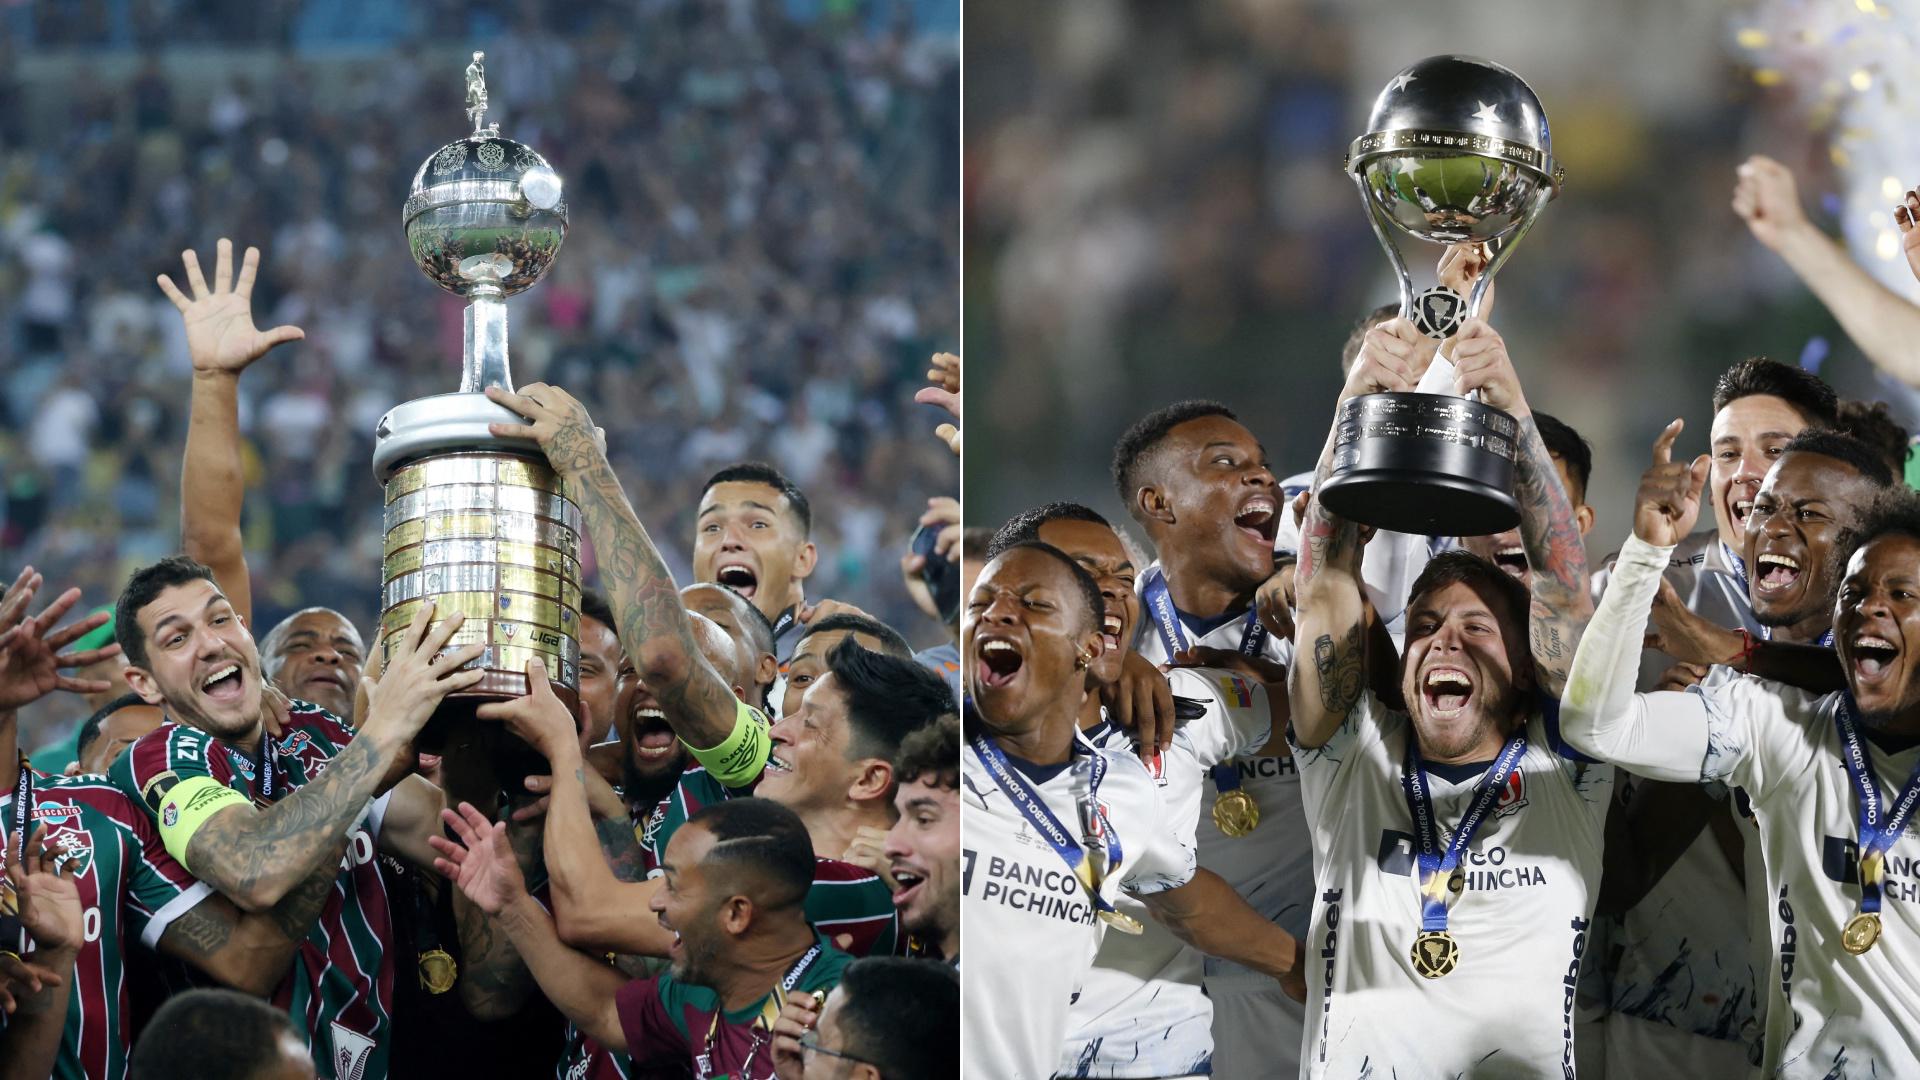 We witnessed history in the first phase of the Copa Conmebol Libertadores 